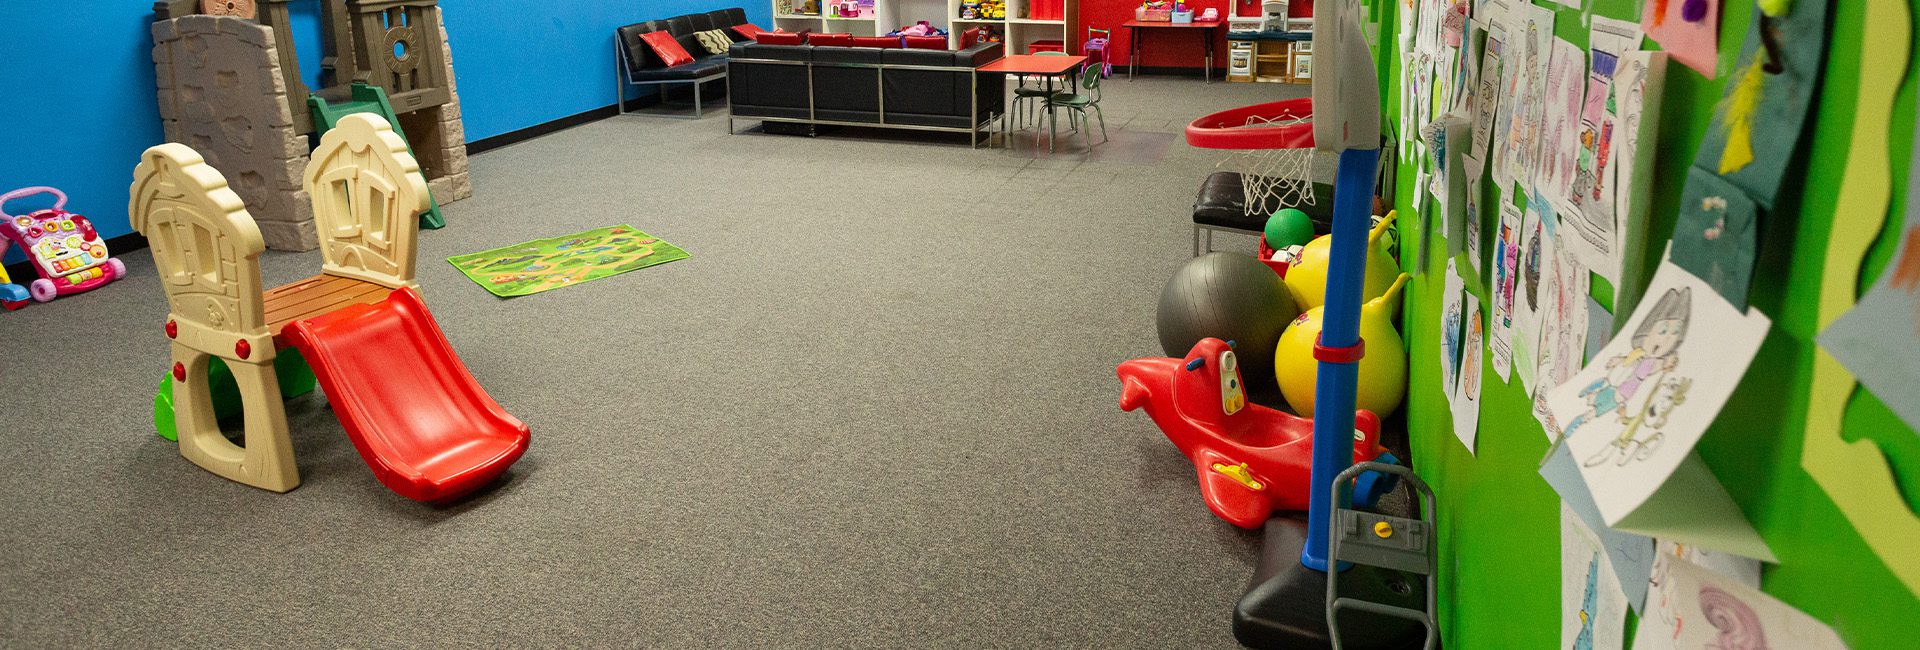 onsite childcare center at a gym in everett